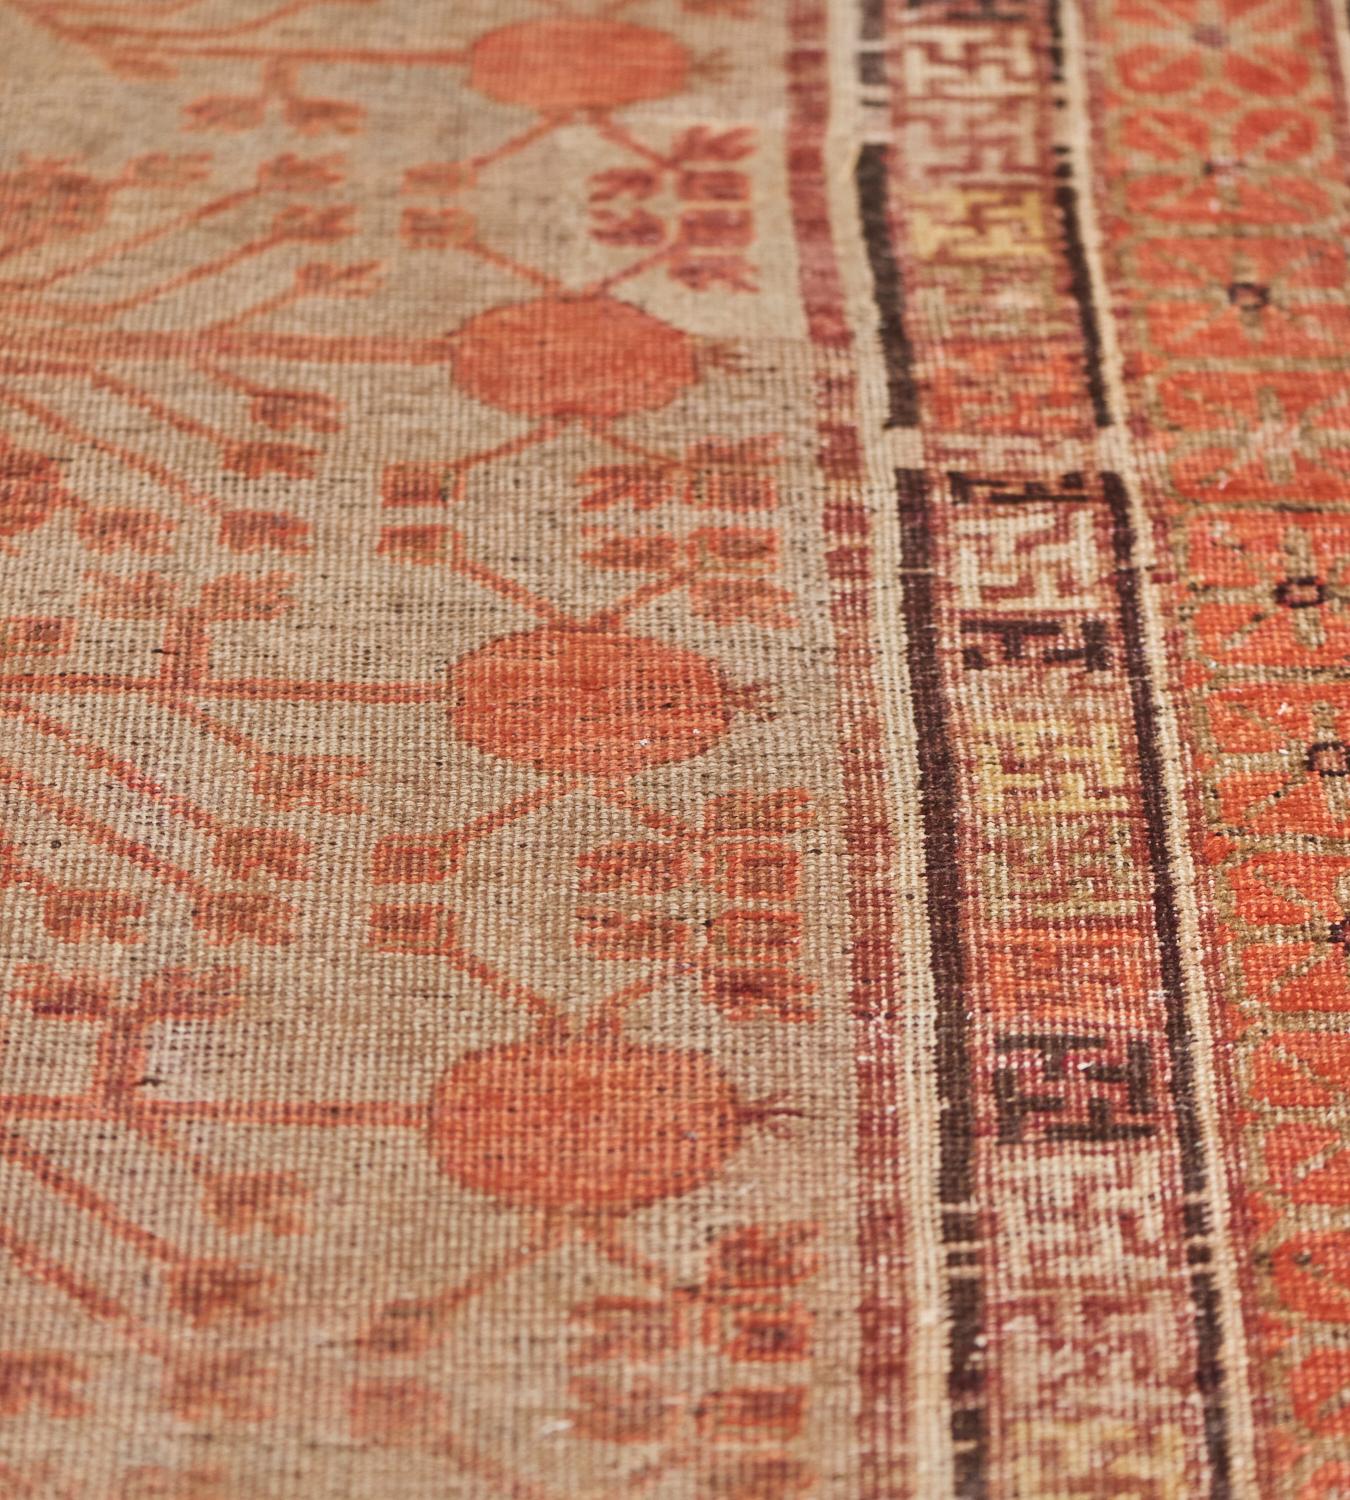 Late-19th Century Handwoven Wool Vintage Khotan Rug In Good Condition For Sale In West Hollywood, CA